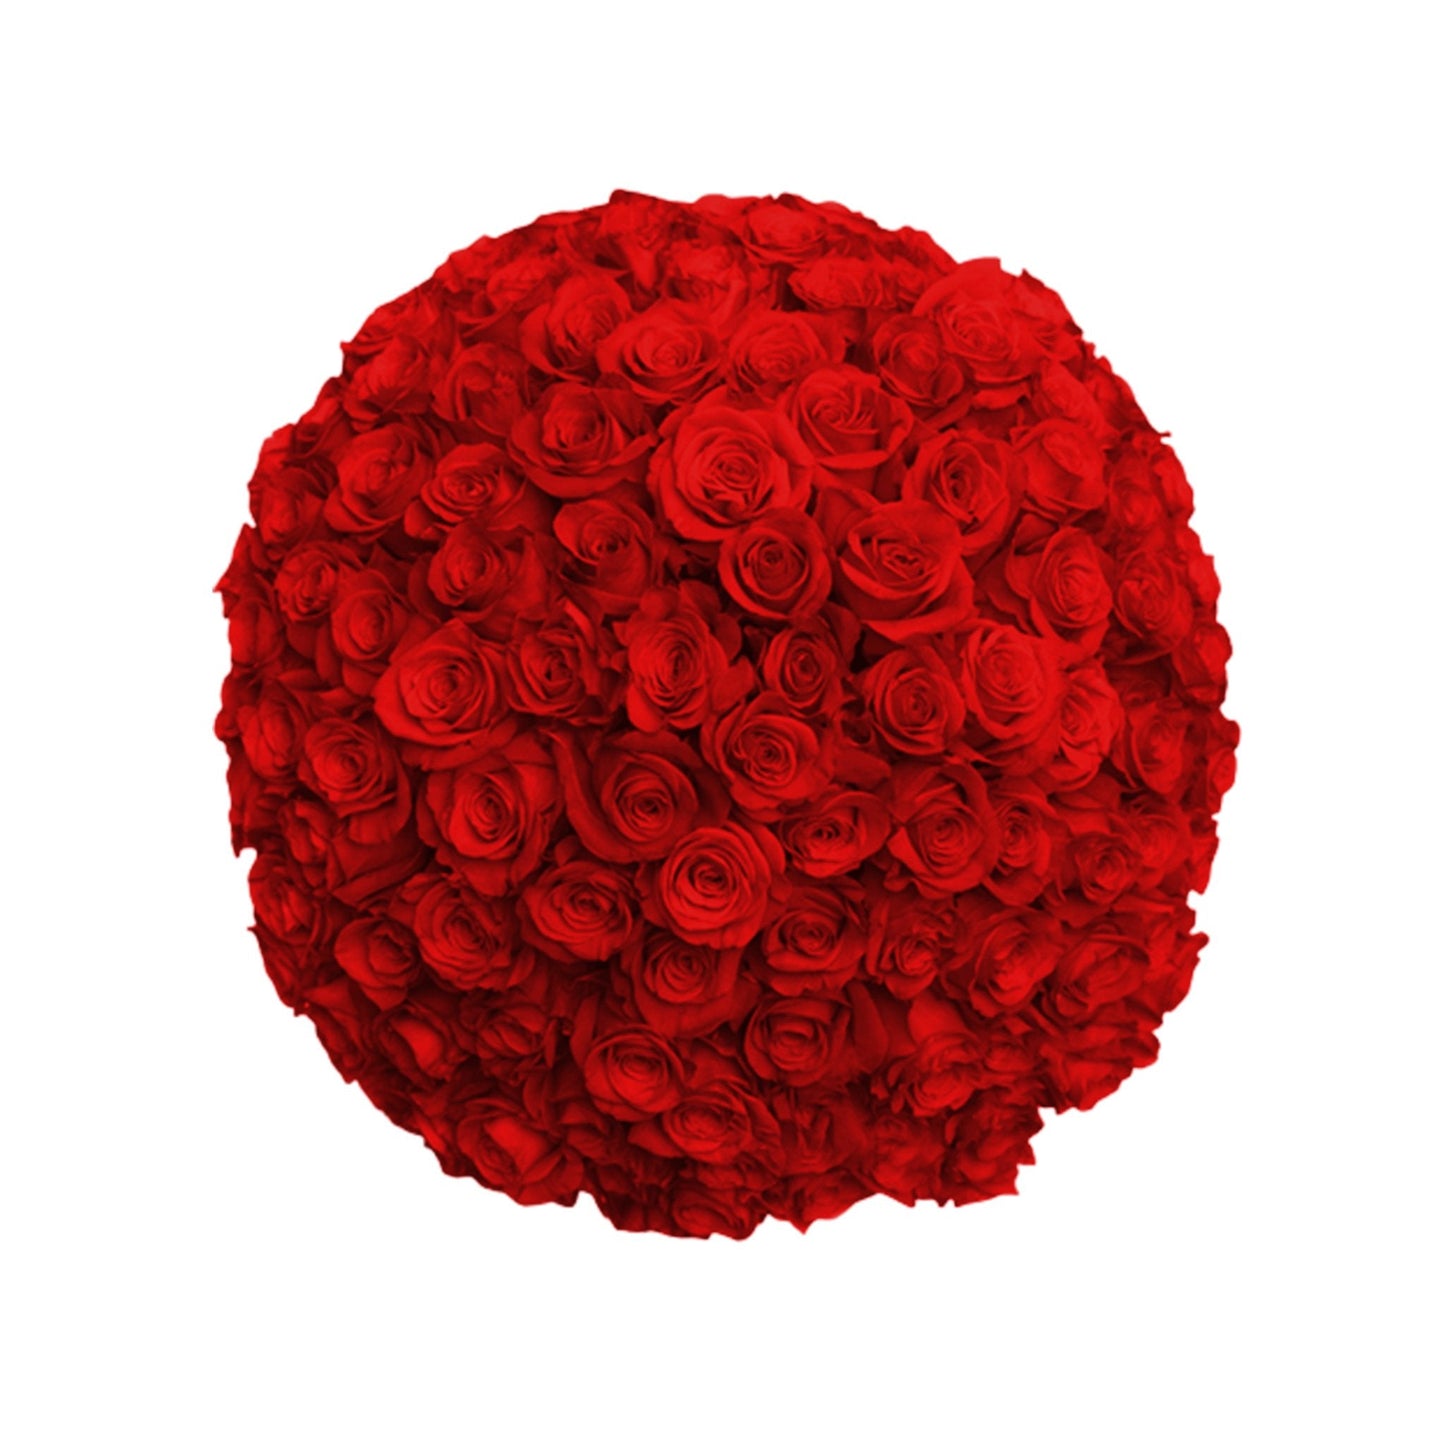 Fresh Roses in a Vase | 100 Red Roses - Fresh Cut Flowers - Queens Flower Delivery